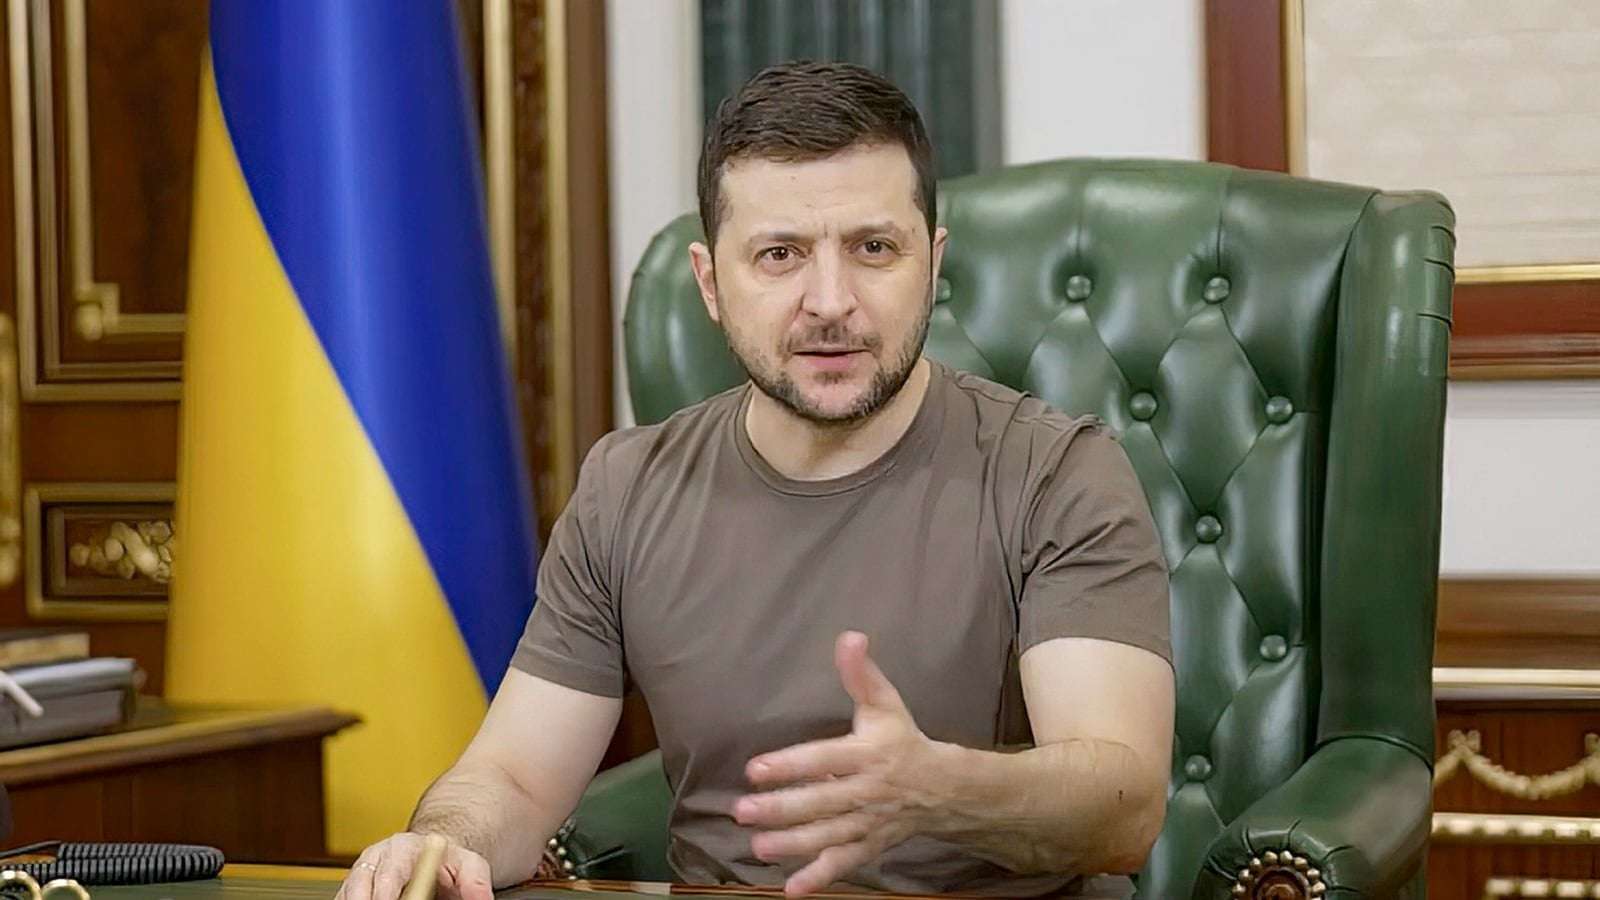 image for Activist who interrupted live Russian TV show catches Ukraine's Zelenskyy's attention. This is what he has to say